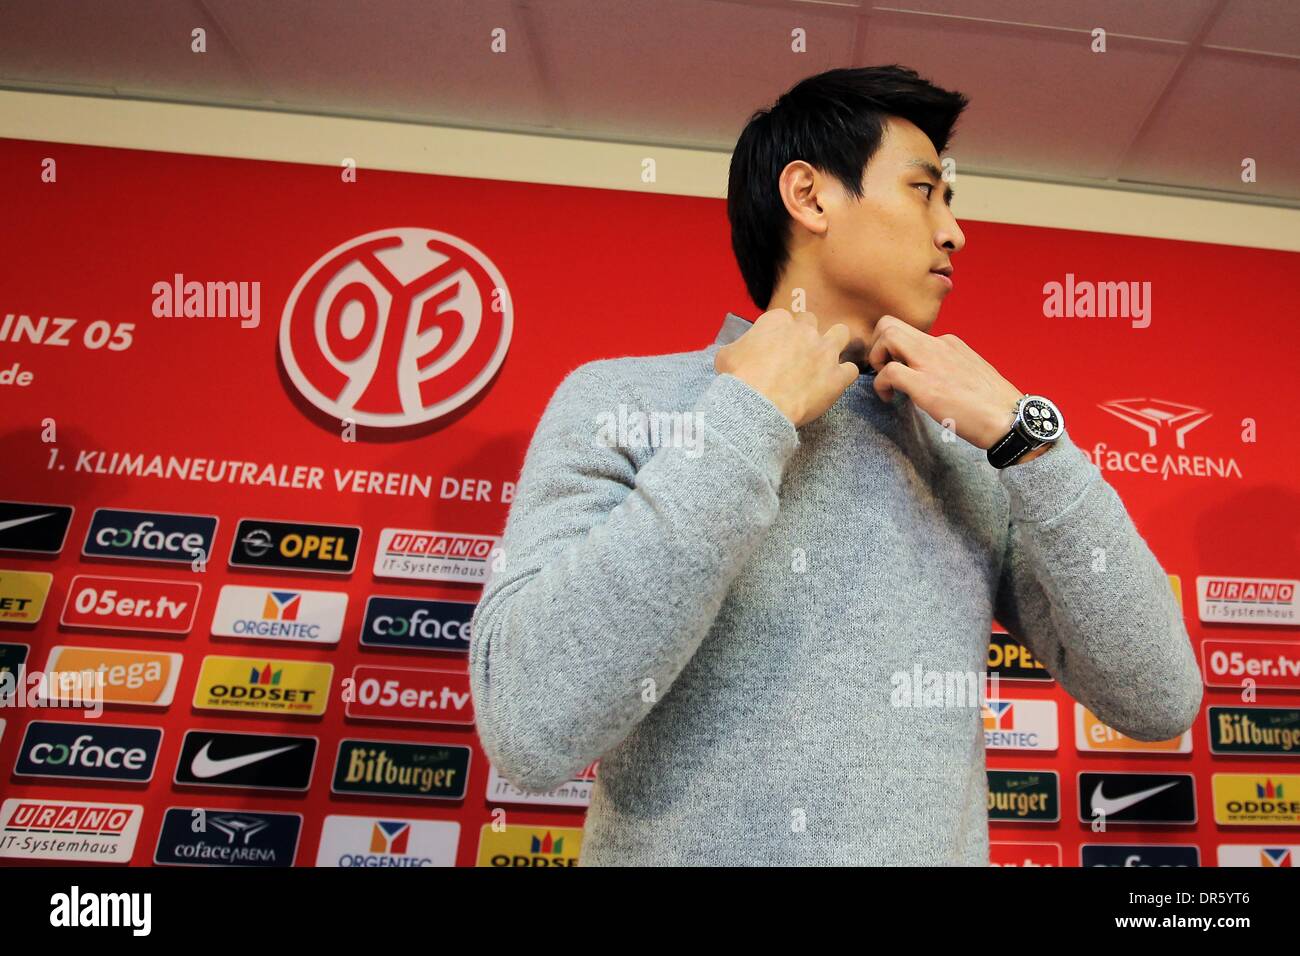 Mainz, Germany. 20th Jan, 2014. New acquisition of Bundesliga soccer club 1. FSV Mainz 05, Koo Ja-Cheol, is pictured at a press conference at Coface Arena in Mainz, Germany, 20 January 2014. Photo: FREDRIK VON ERICHSEN/DPA/Alamy Live News Stock Photo